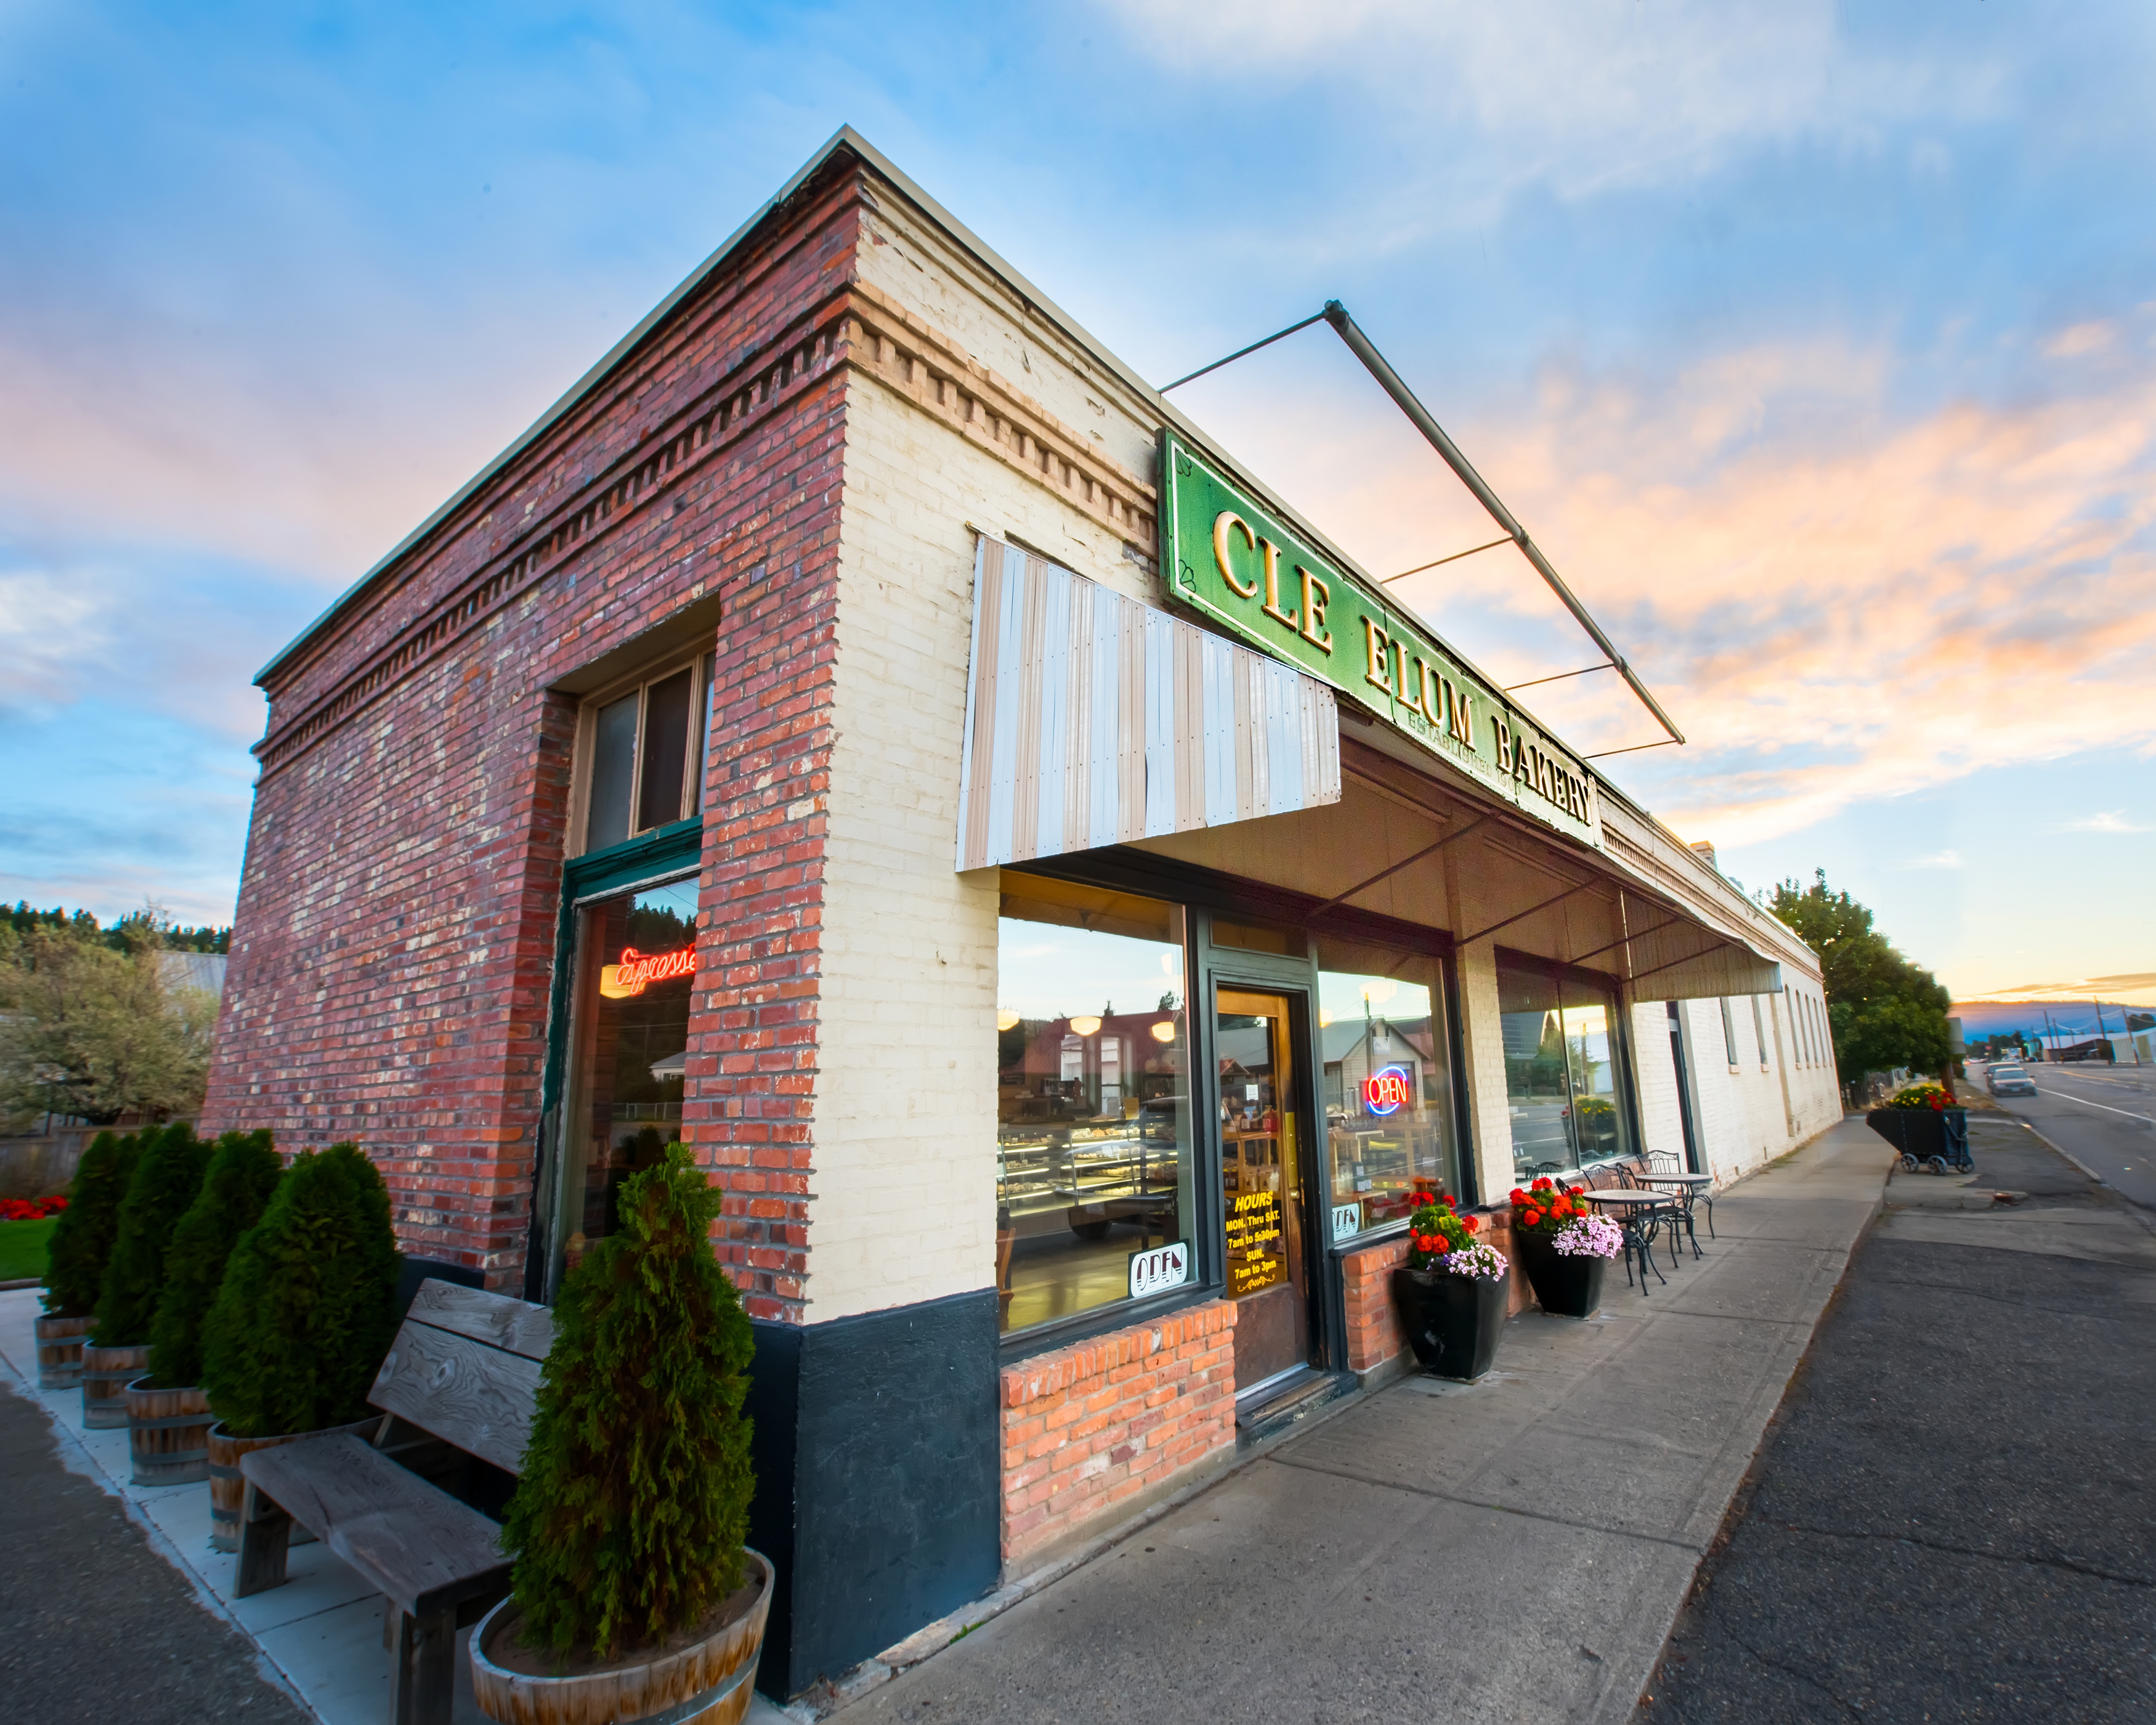 Cle Elum Bakery Commercial Photography